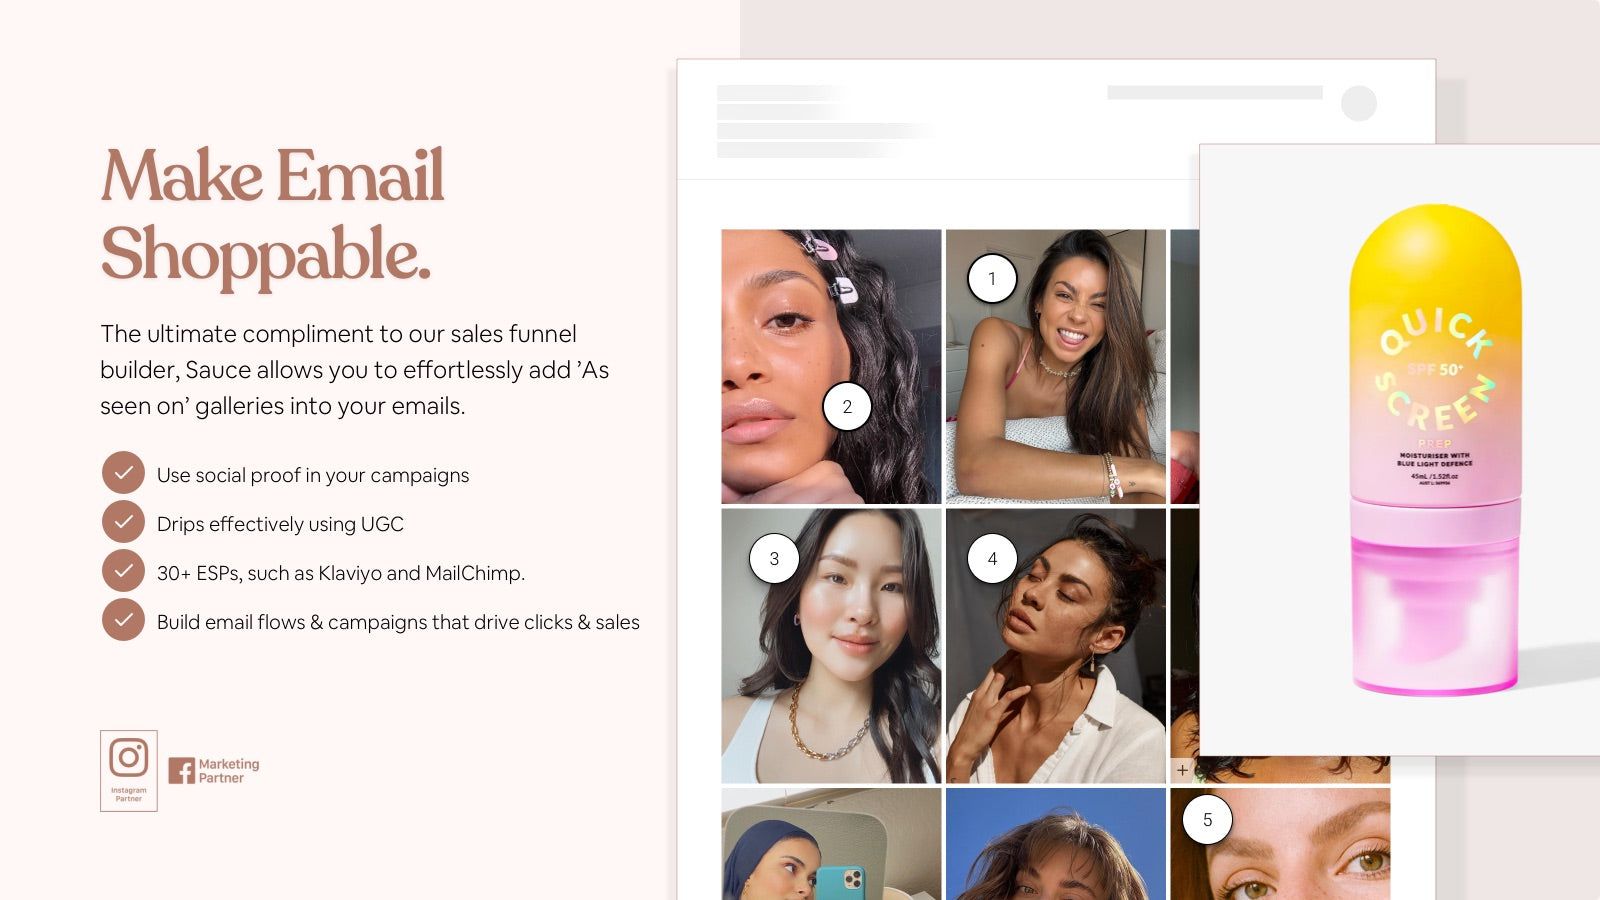 Make your email campaign shoppable